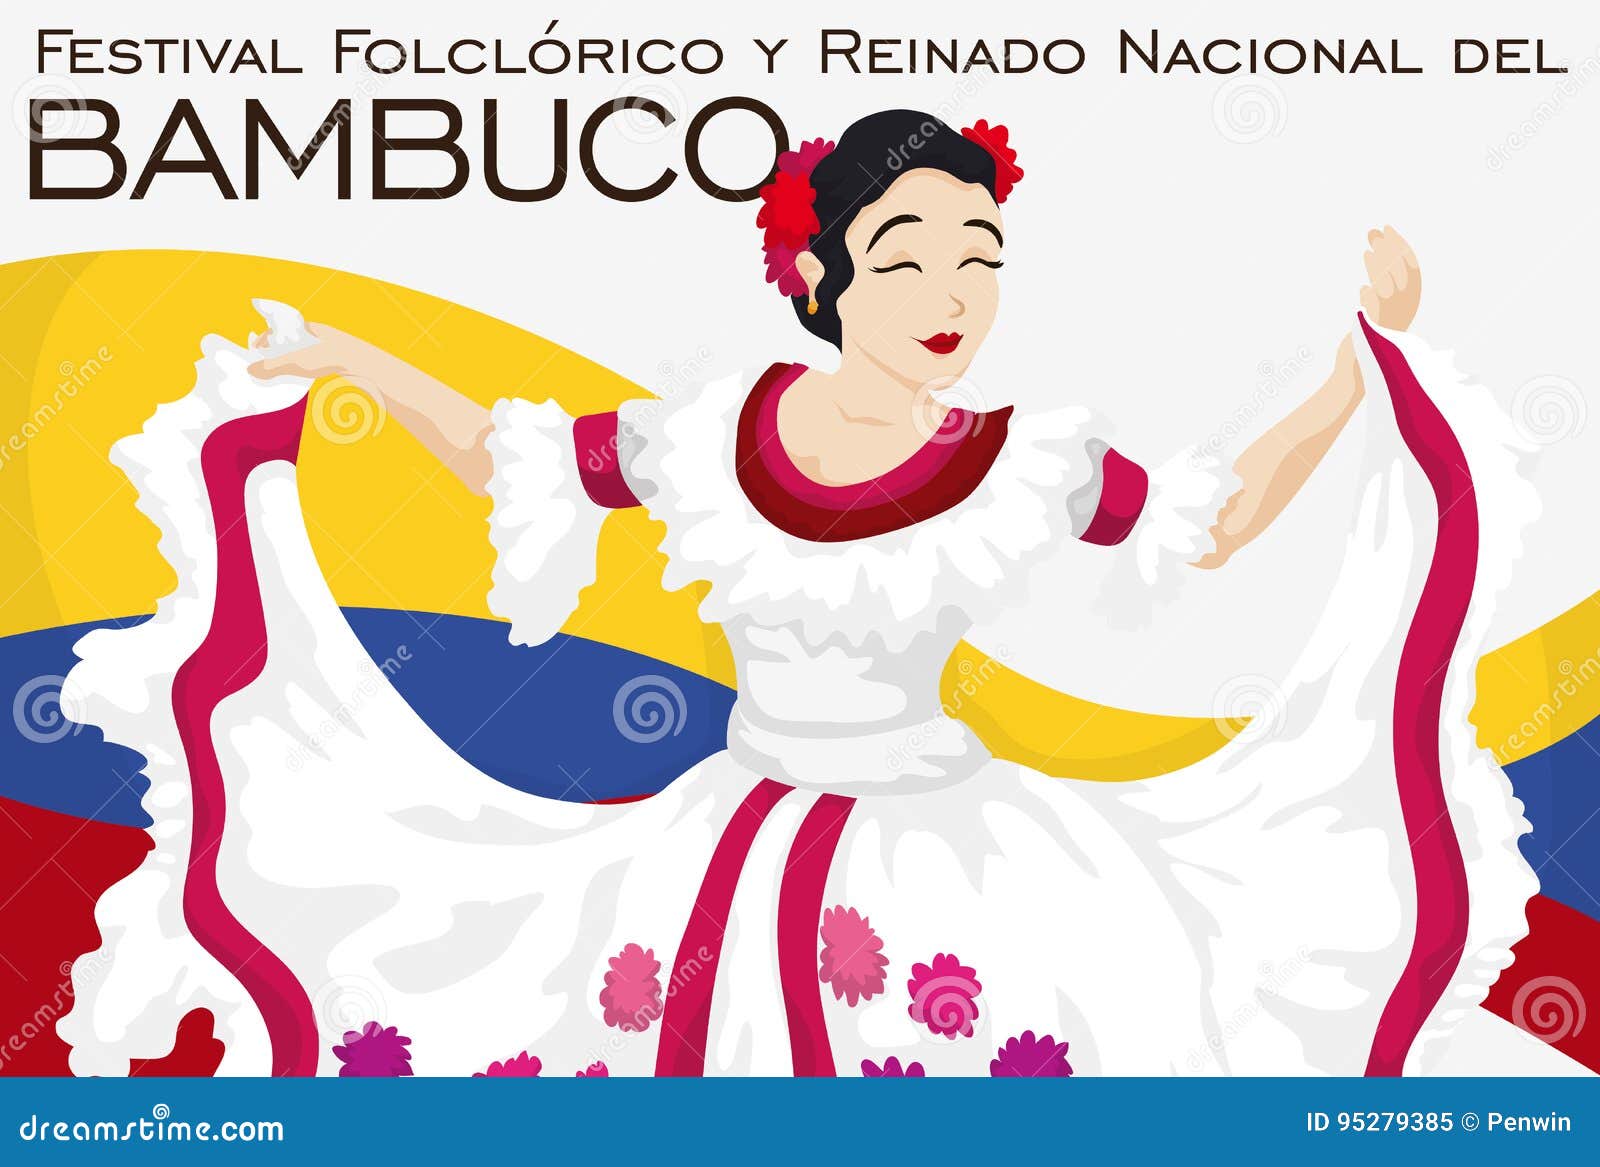 Beautiful Folkloric Queen Dancing in Traditional Colombian Bambuco  Festival, Vector Illustration Stock Vector - Illustration of choreography,  flag: 95279385